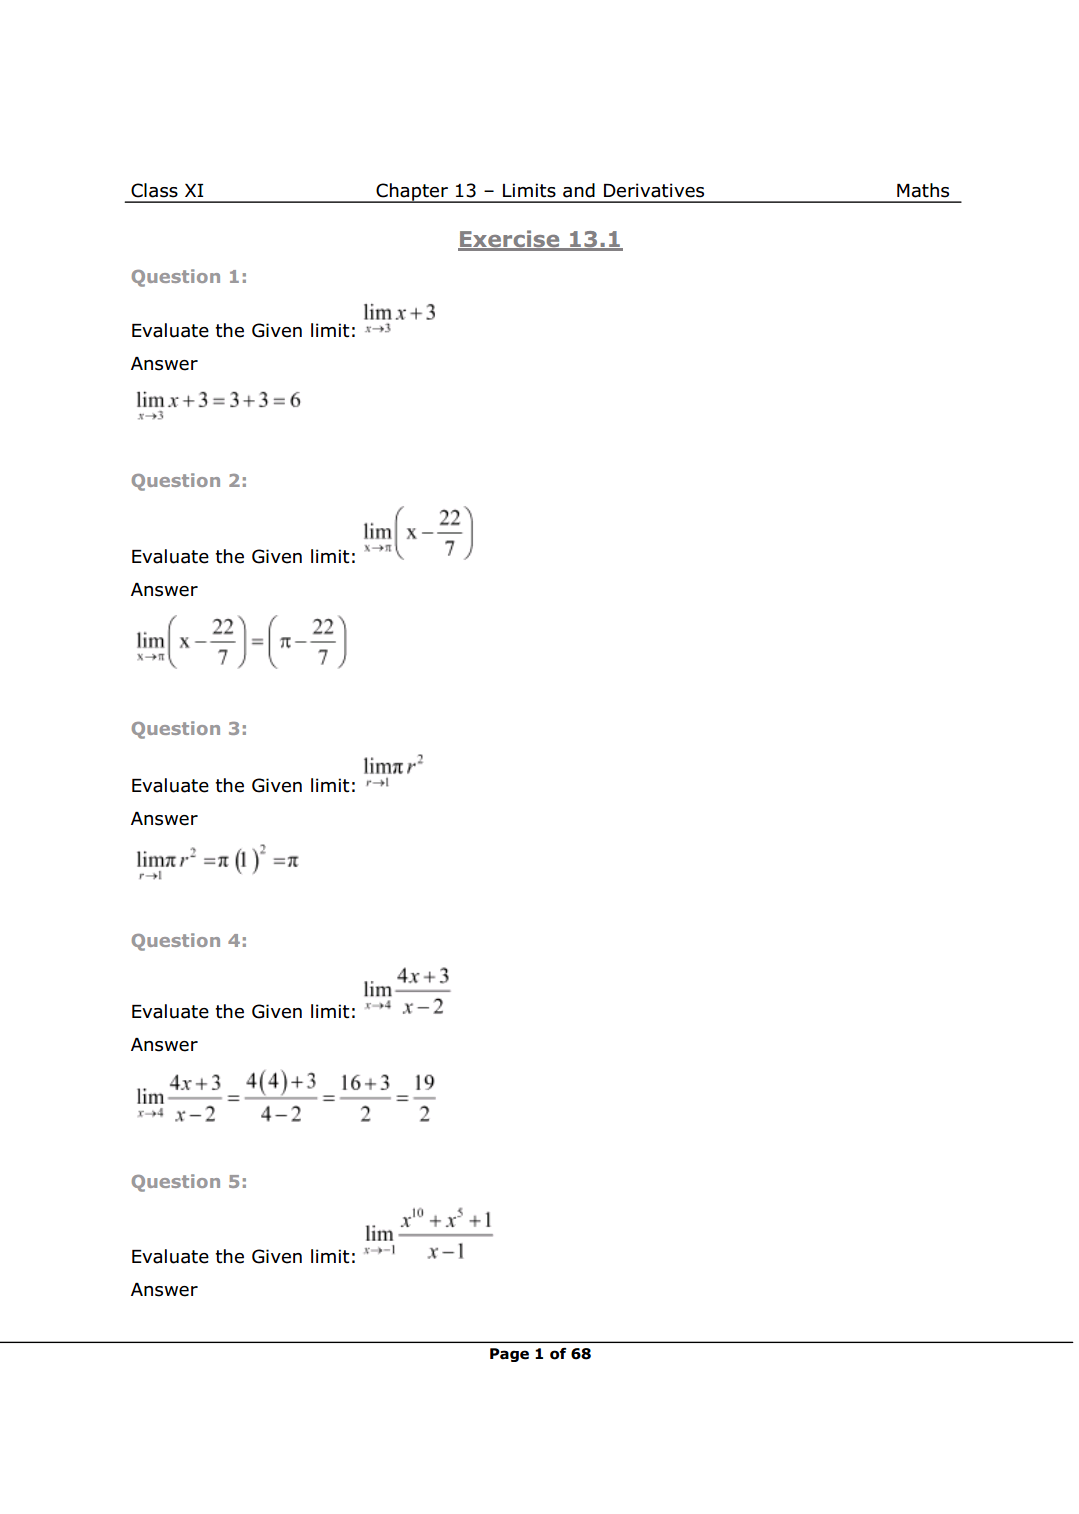 NCERT Solutions for Class 11 Maths chapter 13 image 1